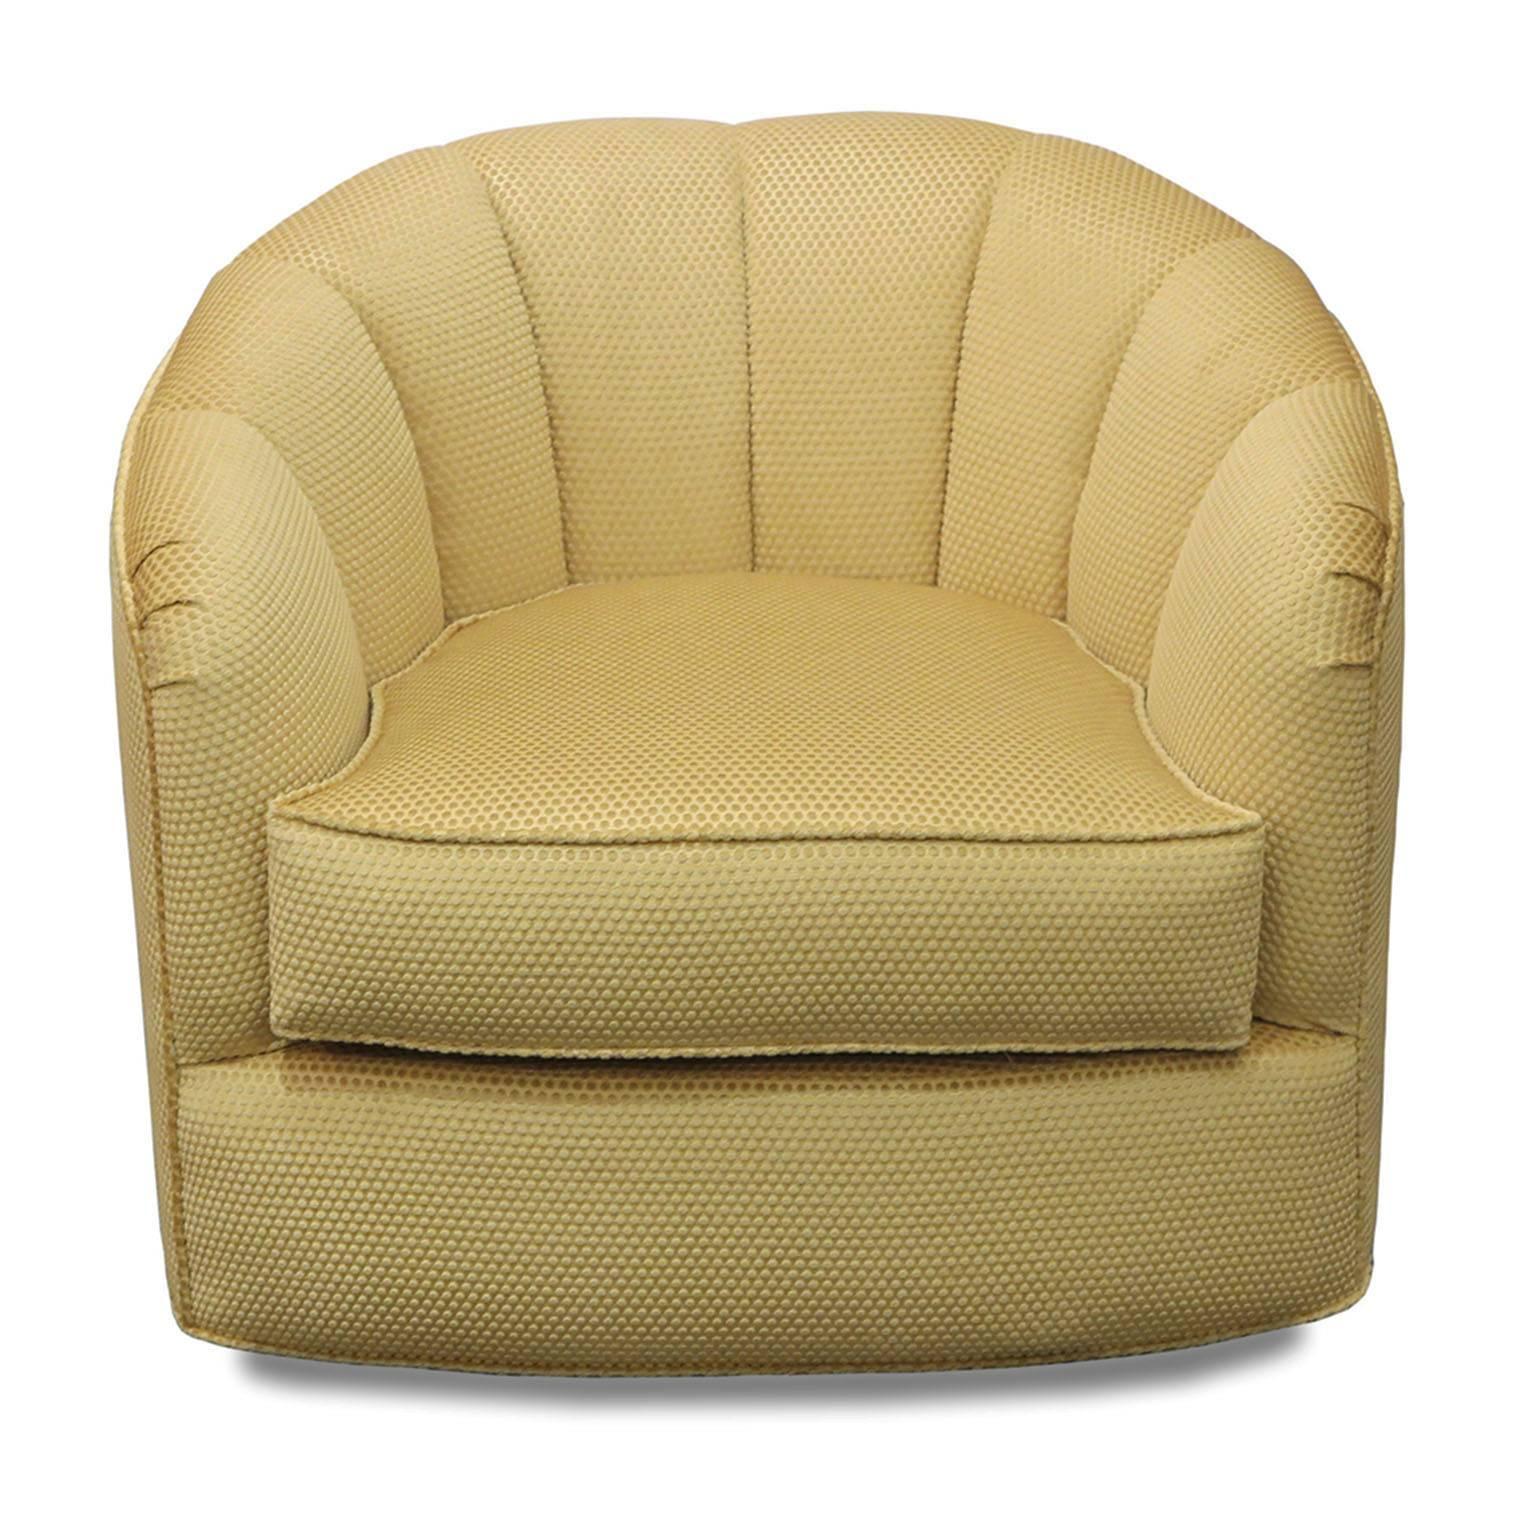 Very comfortable barrel chairs with a swivel base in metal. The chairs have a scalloped back with a seat cushion for highest comfort. The new golden upholstery with raised dots makes these chairs a real eye-catcher.